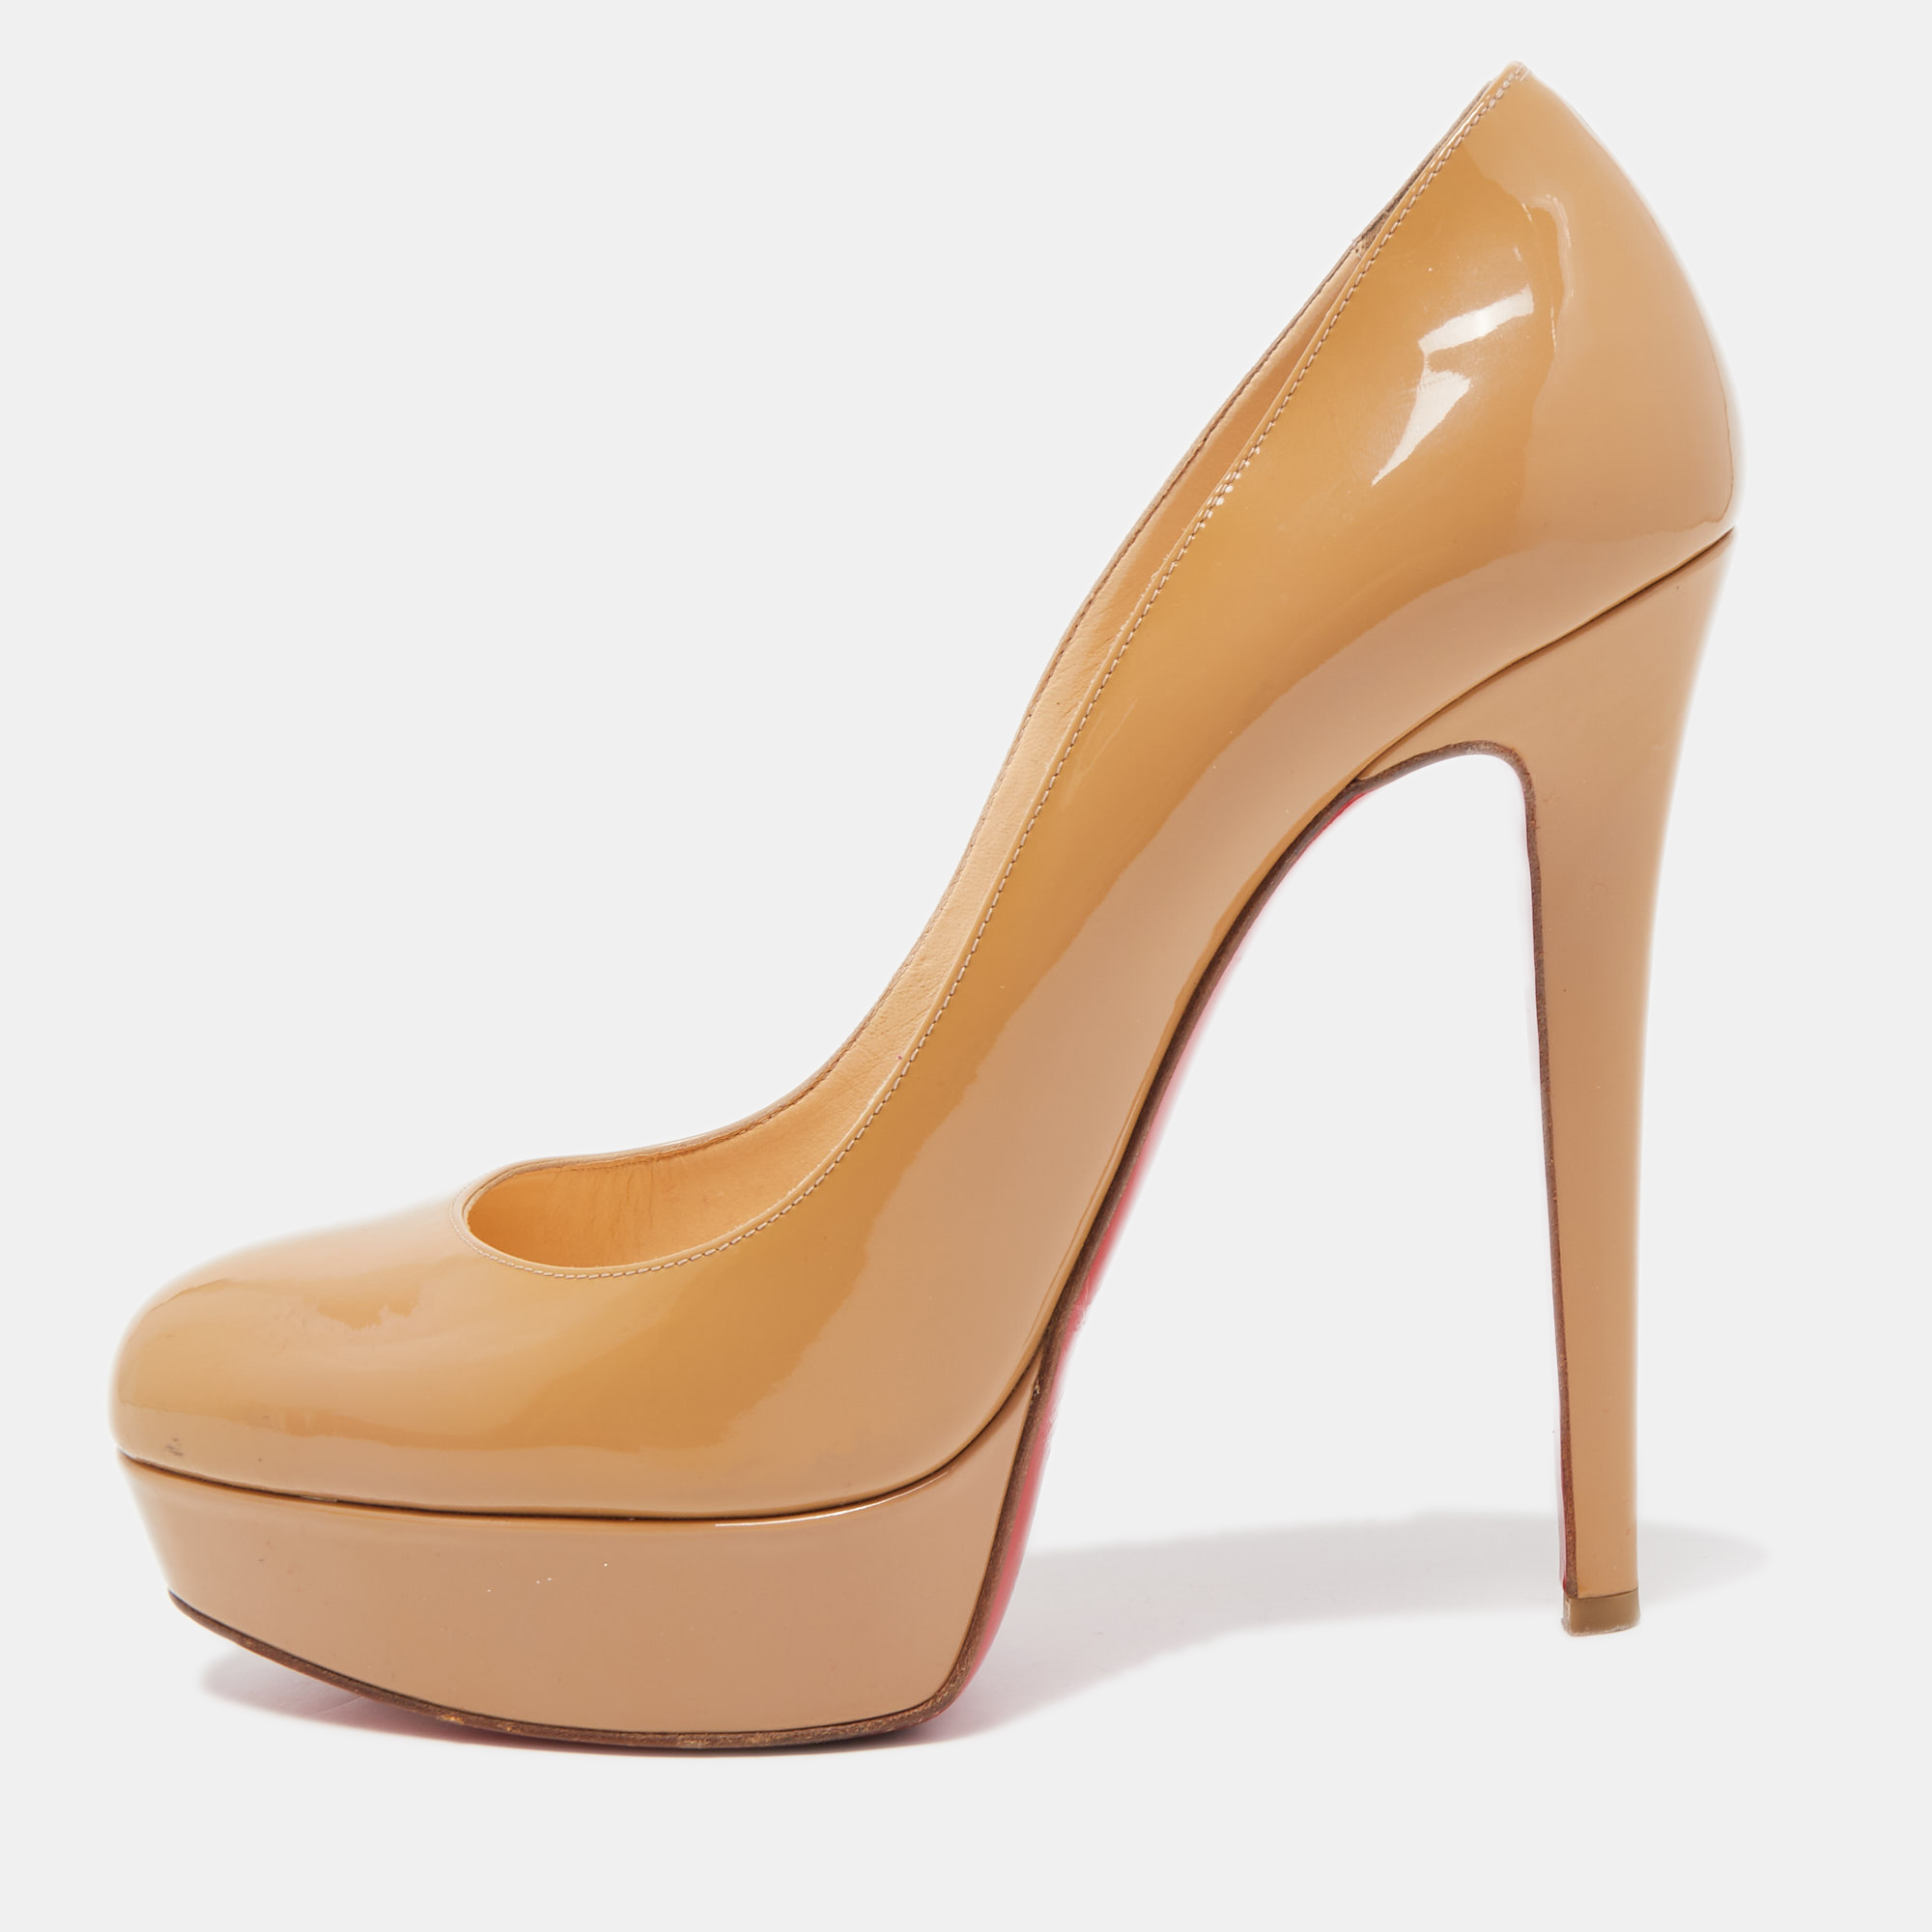 Christian Louboutin Beige Patent Leather Bianca Pumps Size 39